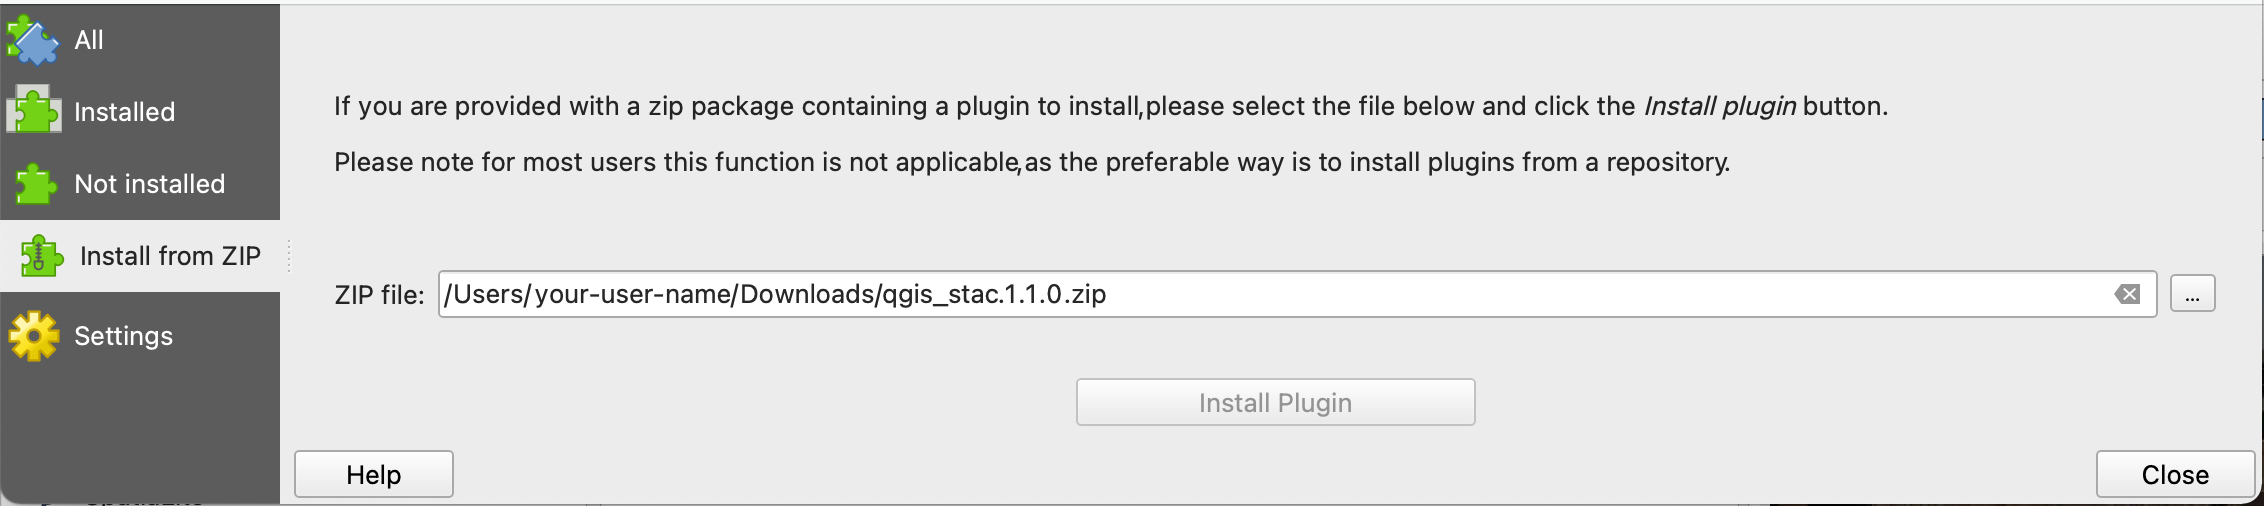 Screenshot of the installation of the STAC plugin from a ZIP file